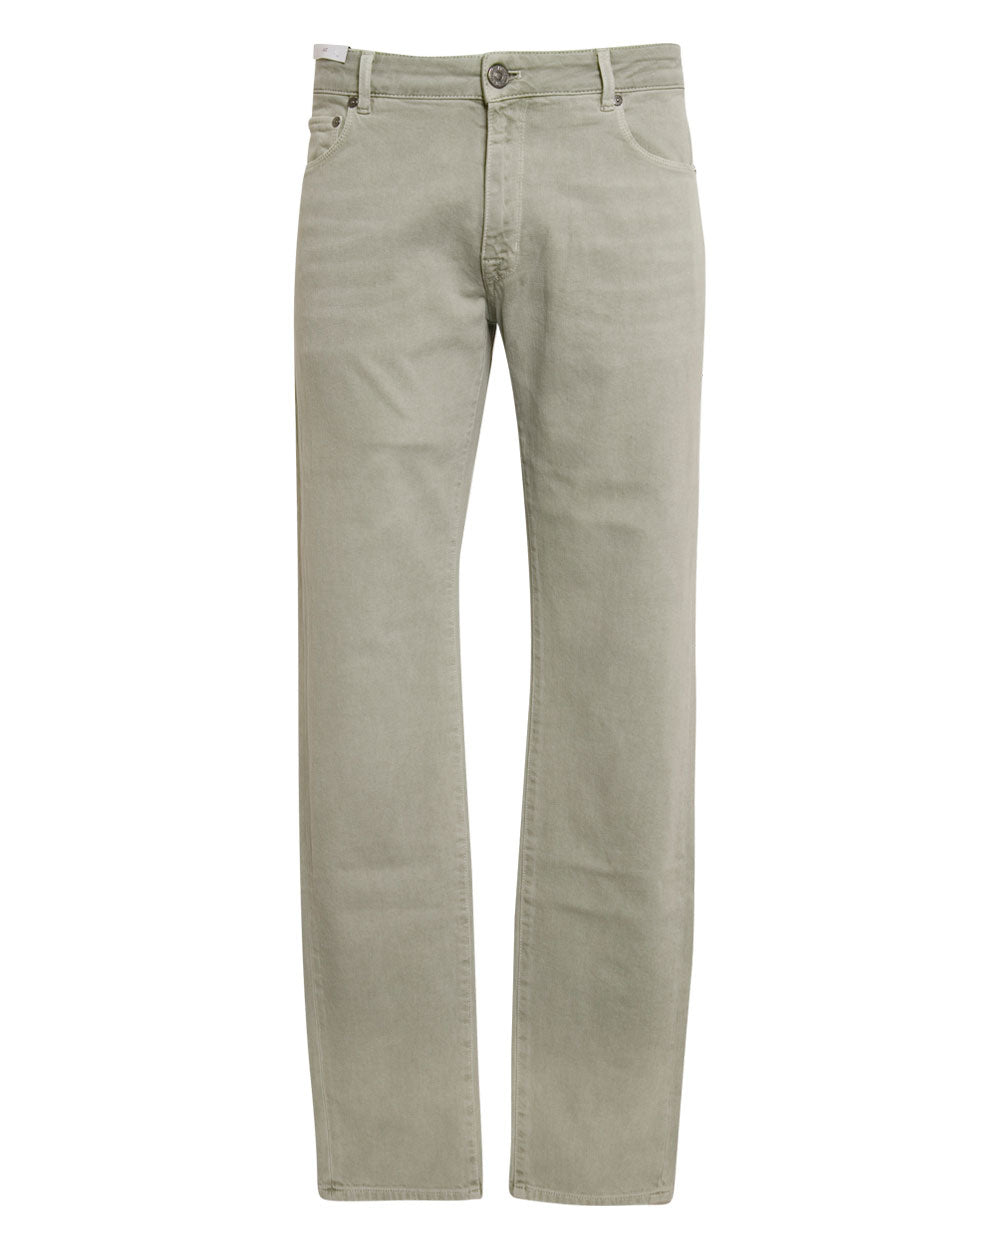 Washed Twill Denim Pant in Sage